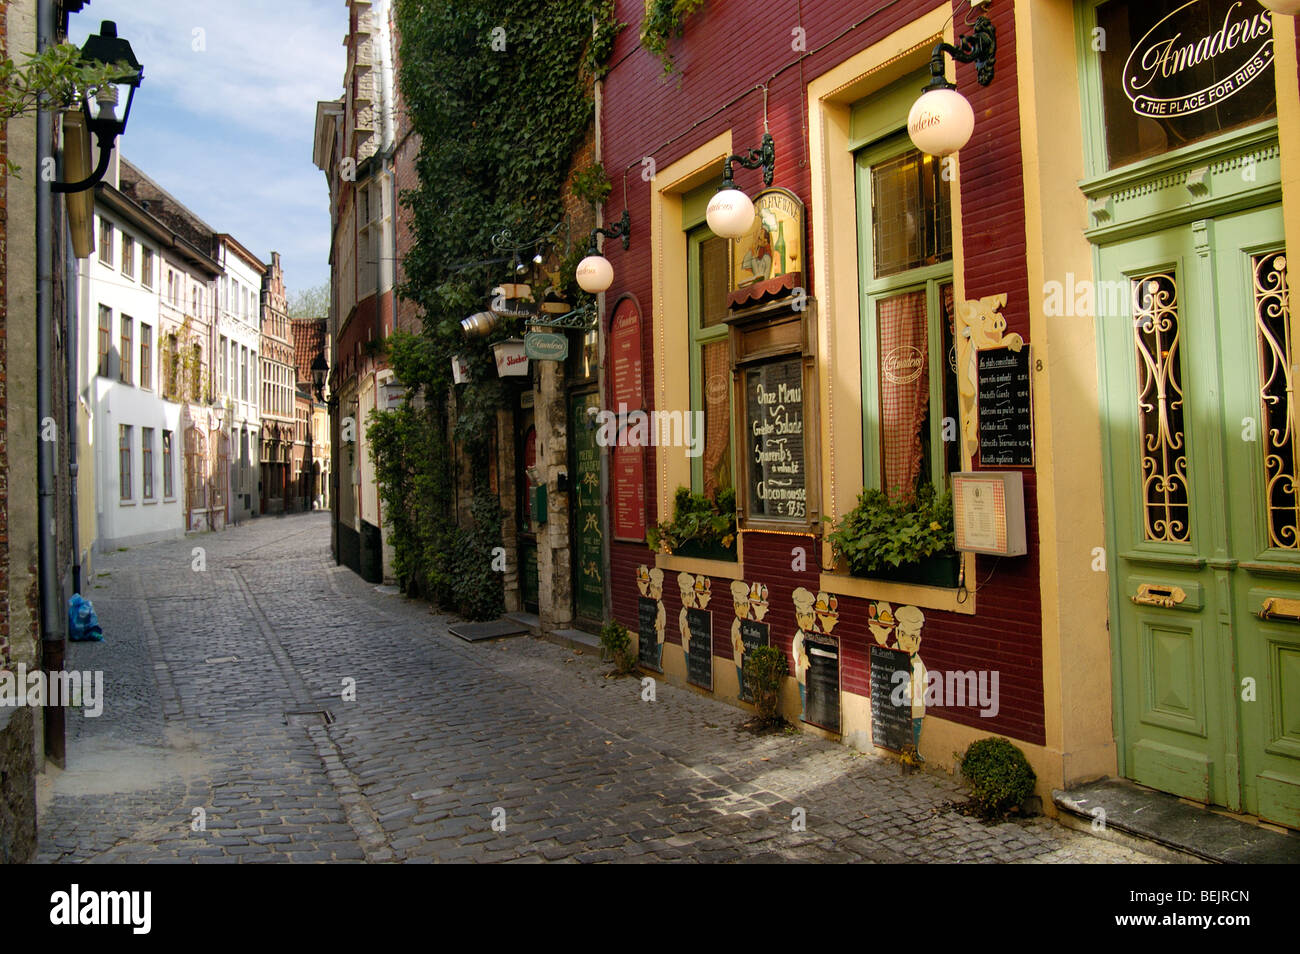 Alley with restaurants in the Patershol, Ghent, Belgium Stock Photo